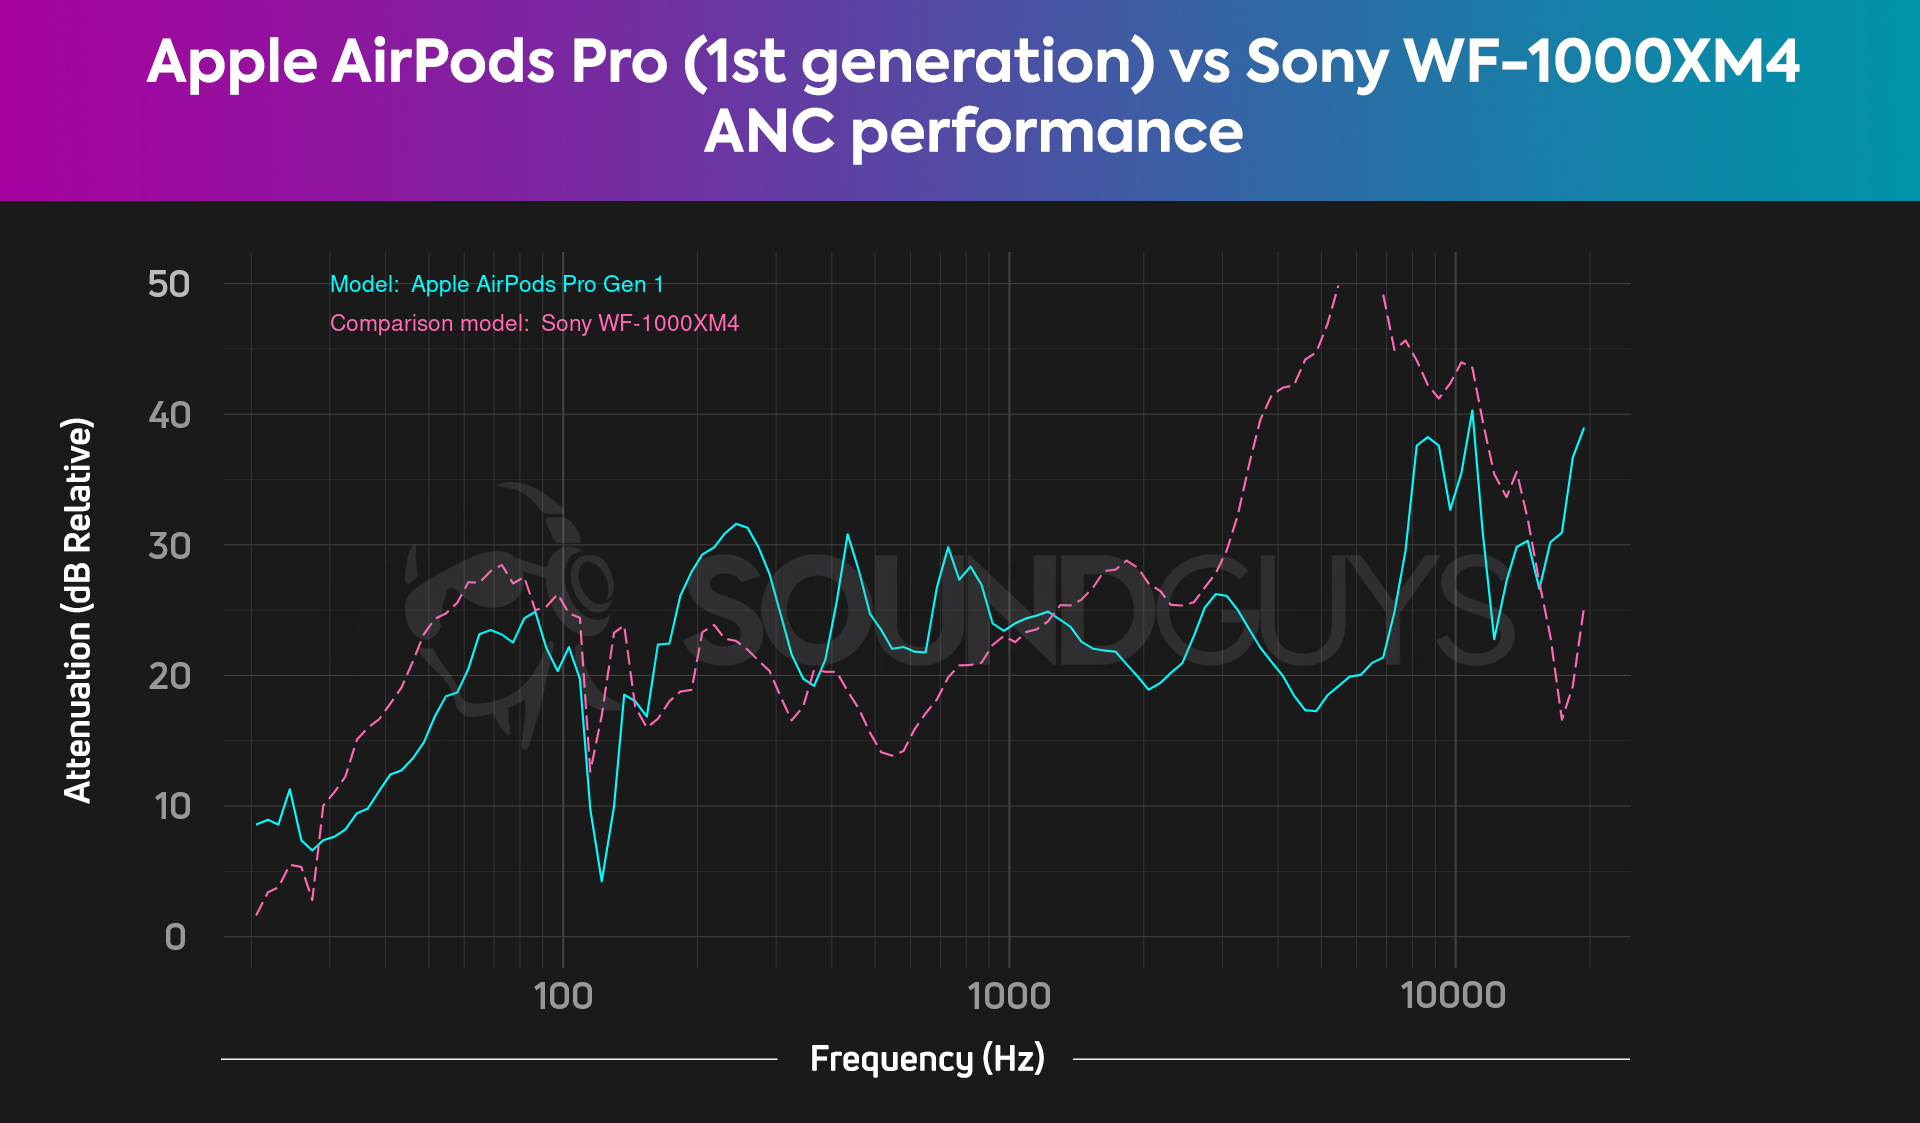 A chart compares the AirPods Pro 1 and Sony WF-1000XM4 noise canceling, revealing similar performances.